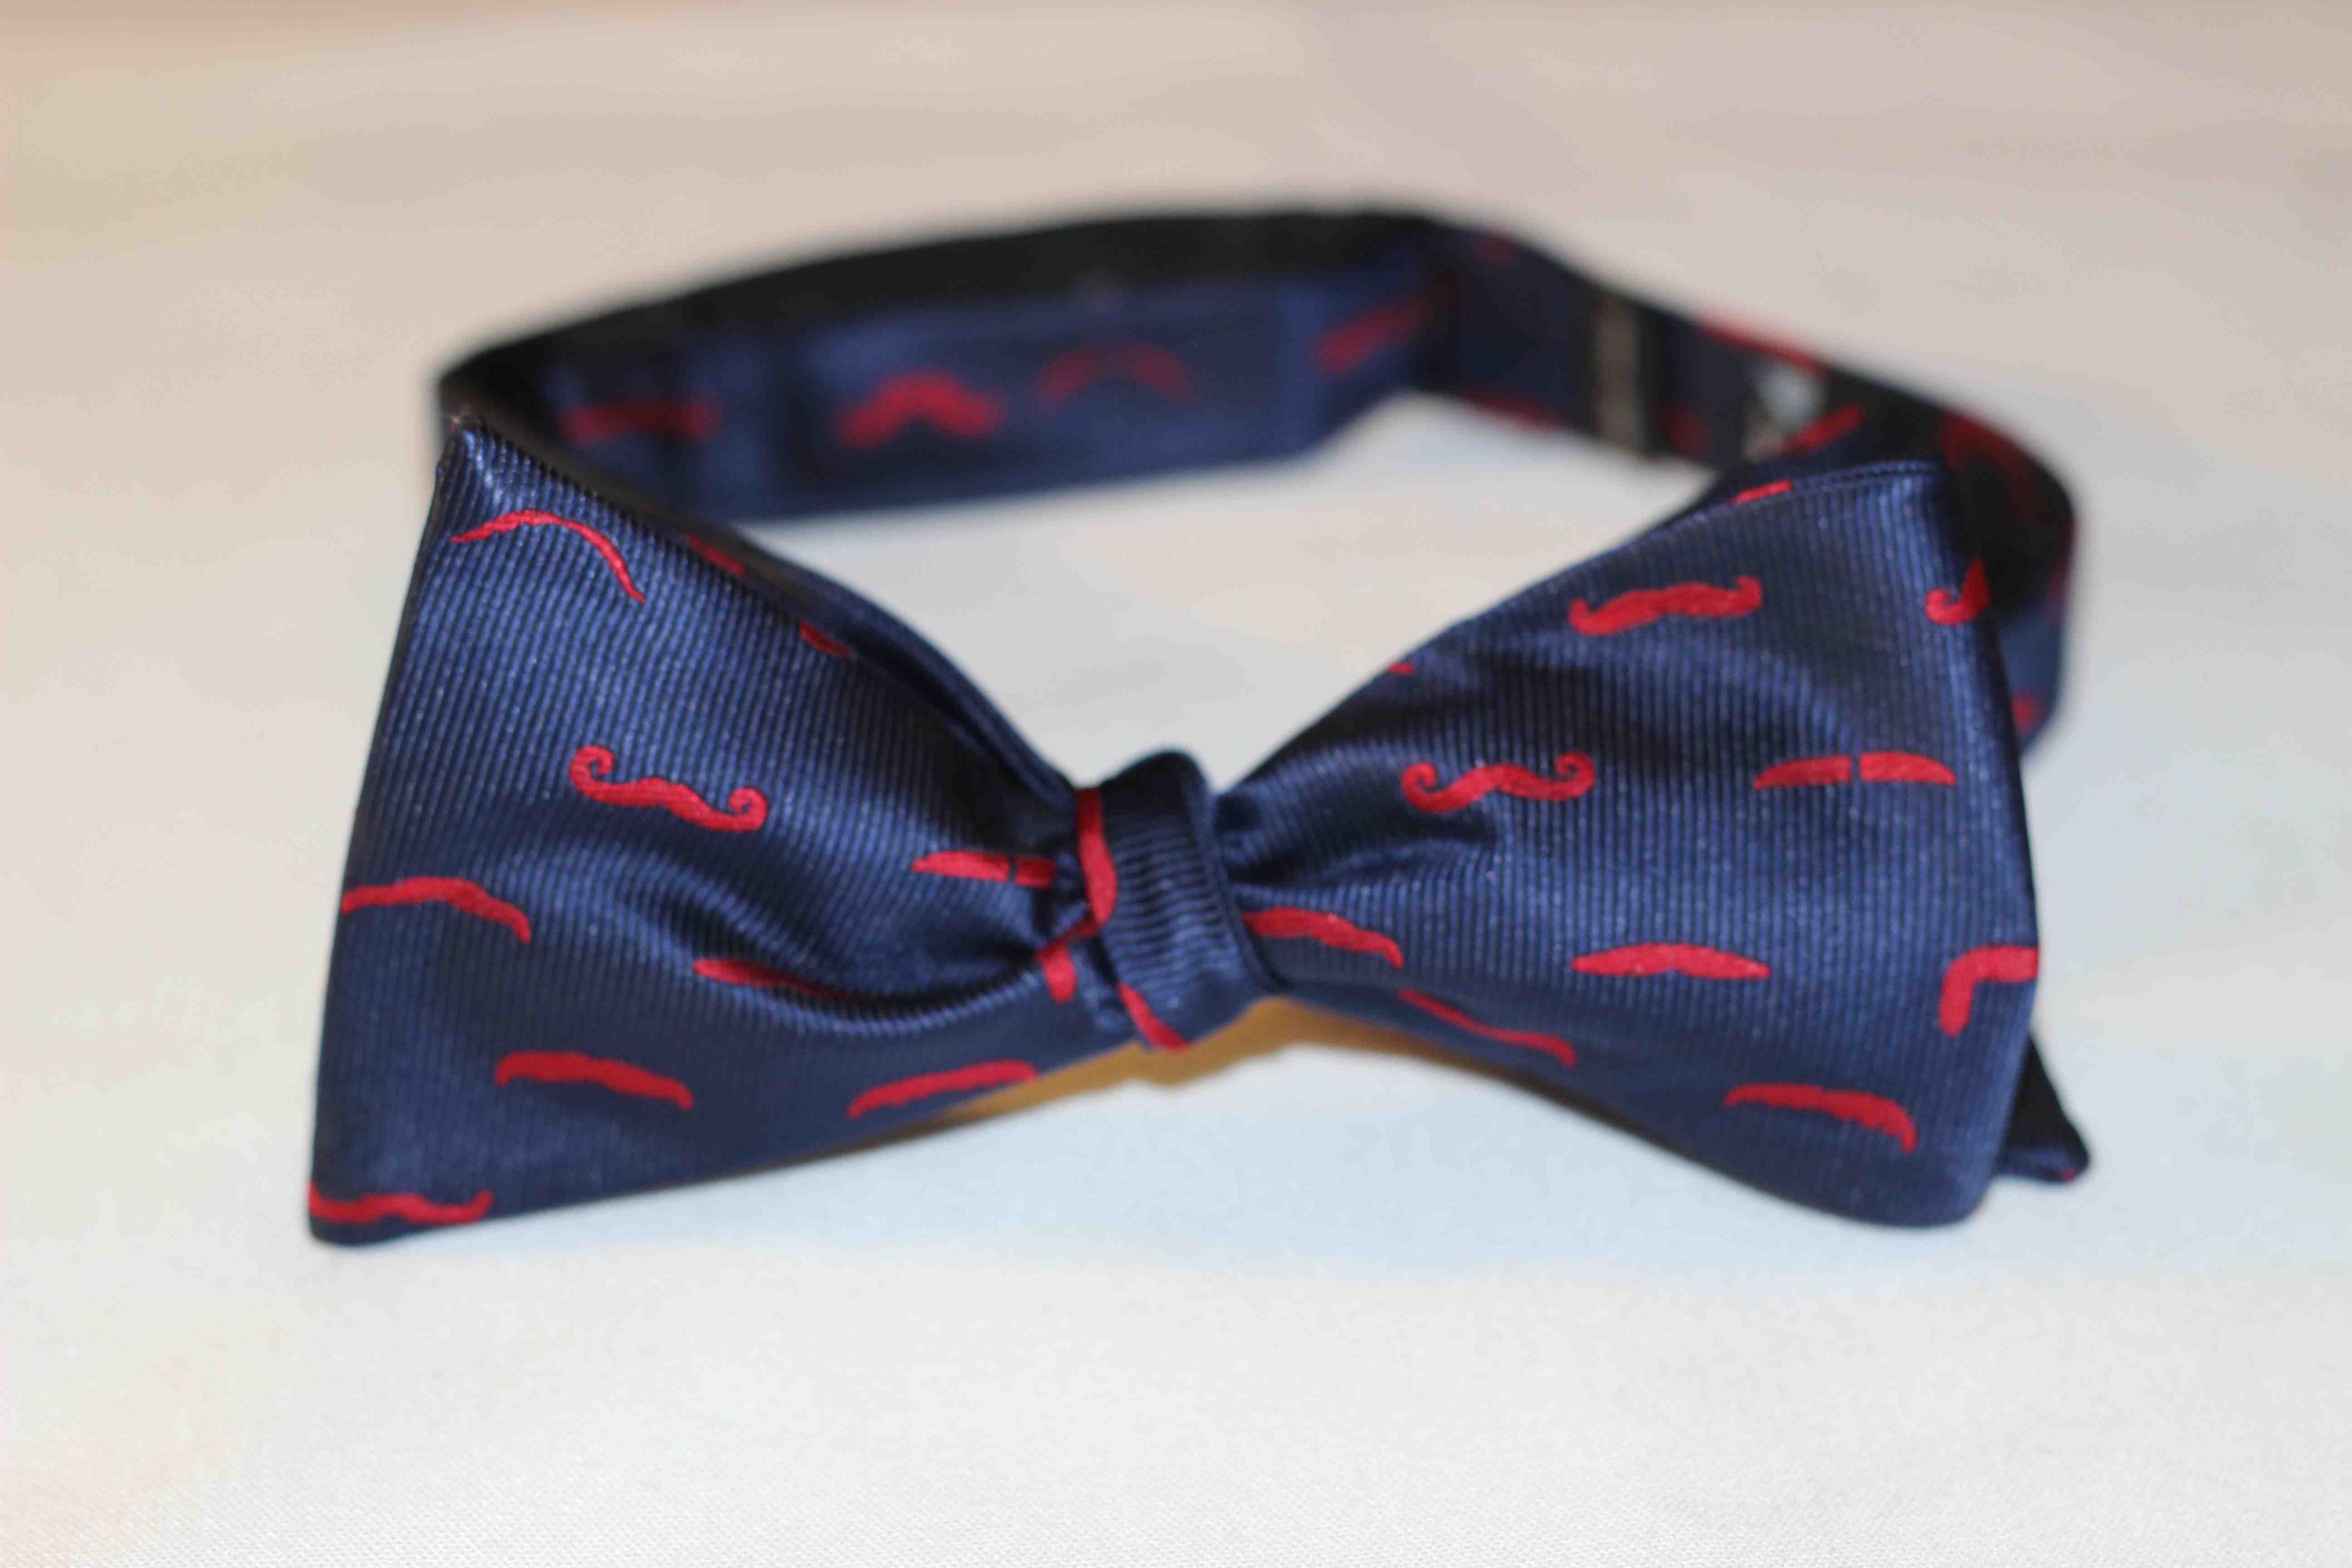 Rock My Bow Tie and Other Men’s Fashion Apparel Companies